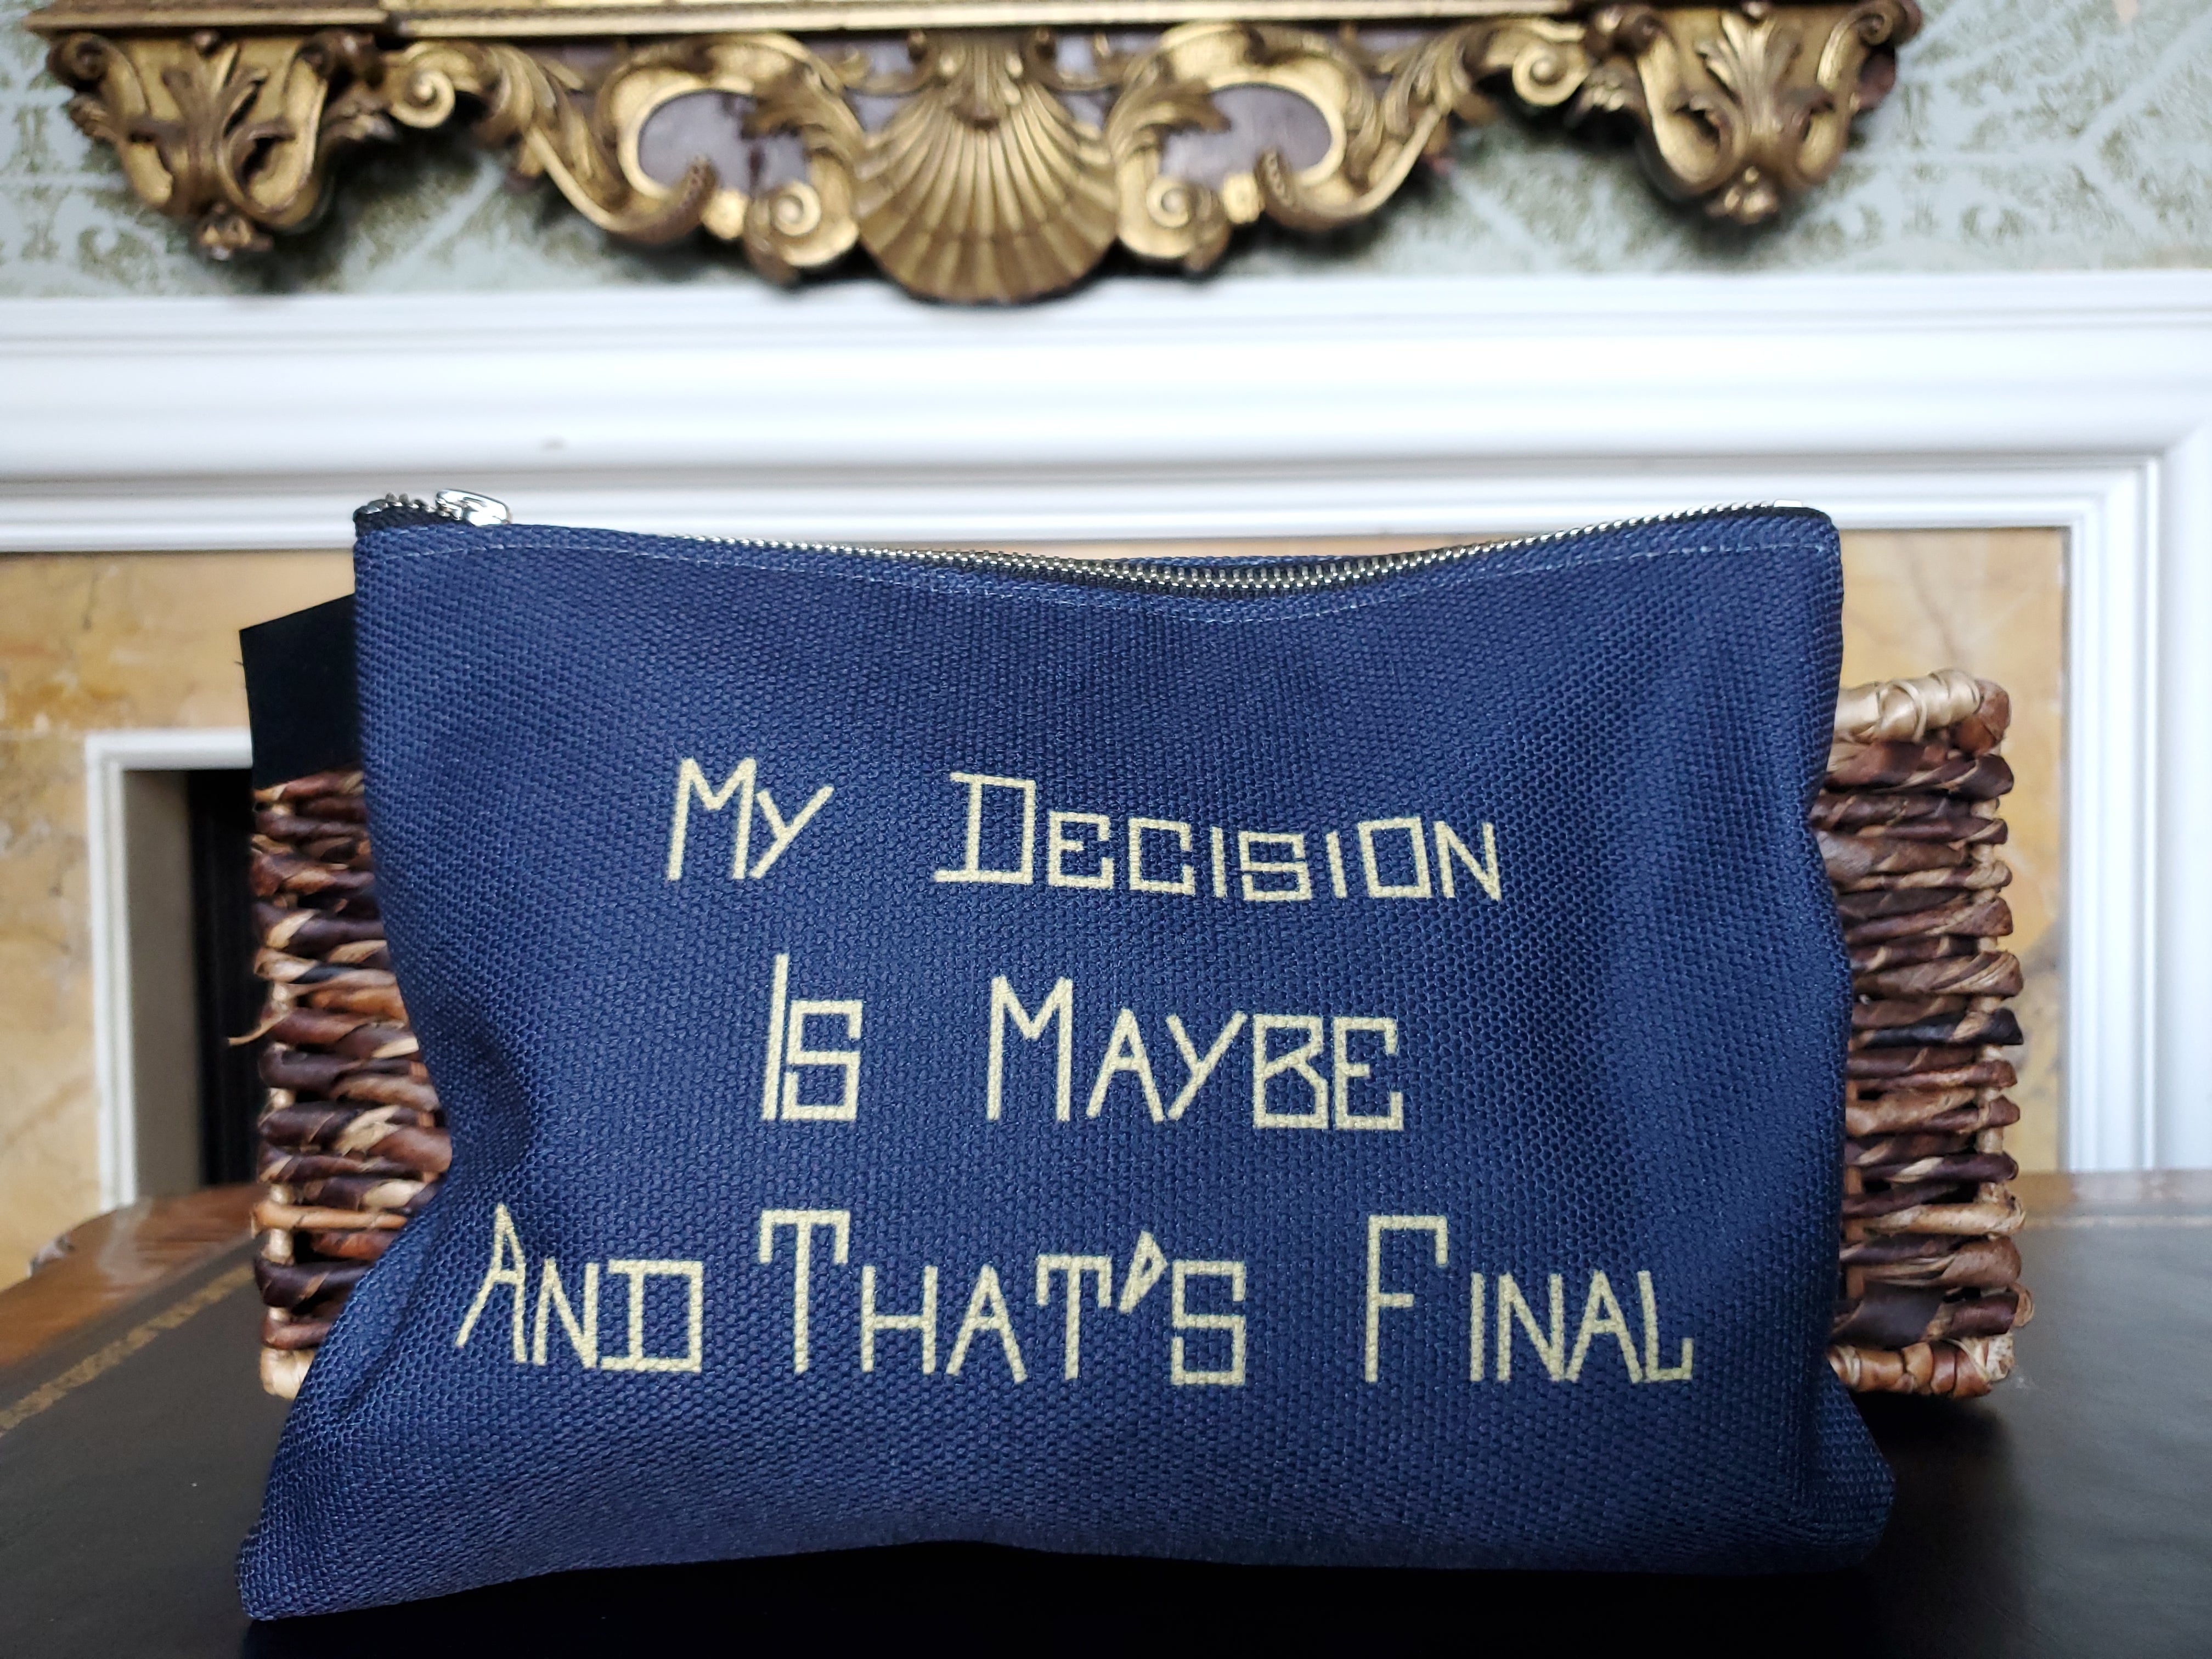 "My Decision is Maybe and That's Final" Carry-All